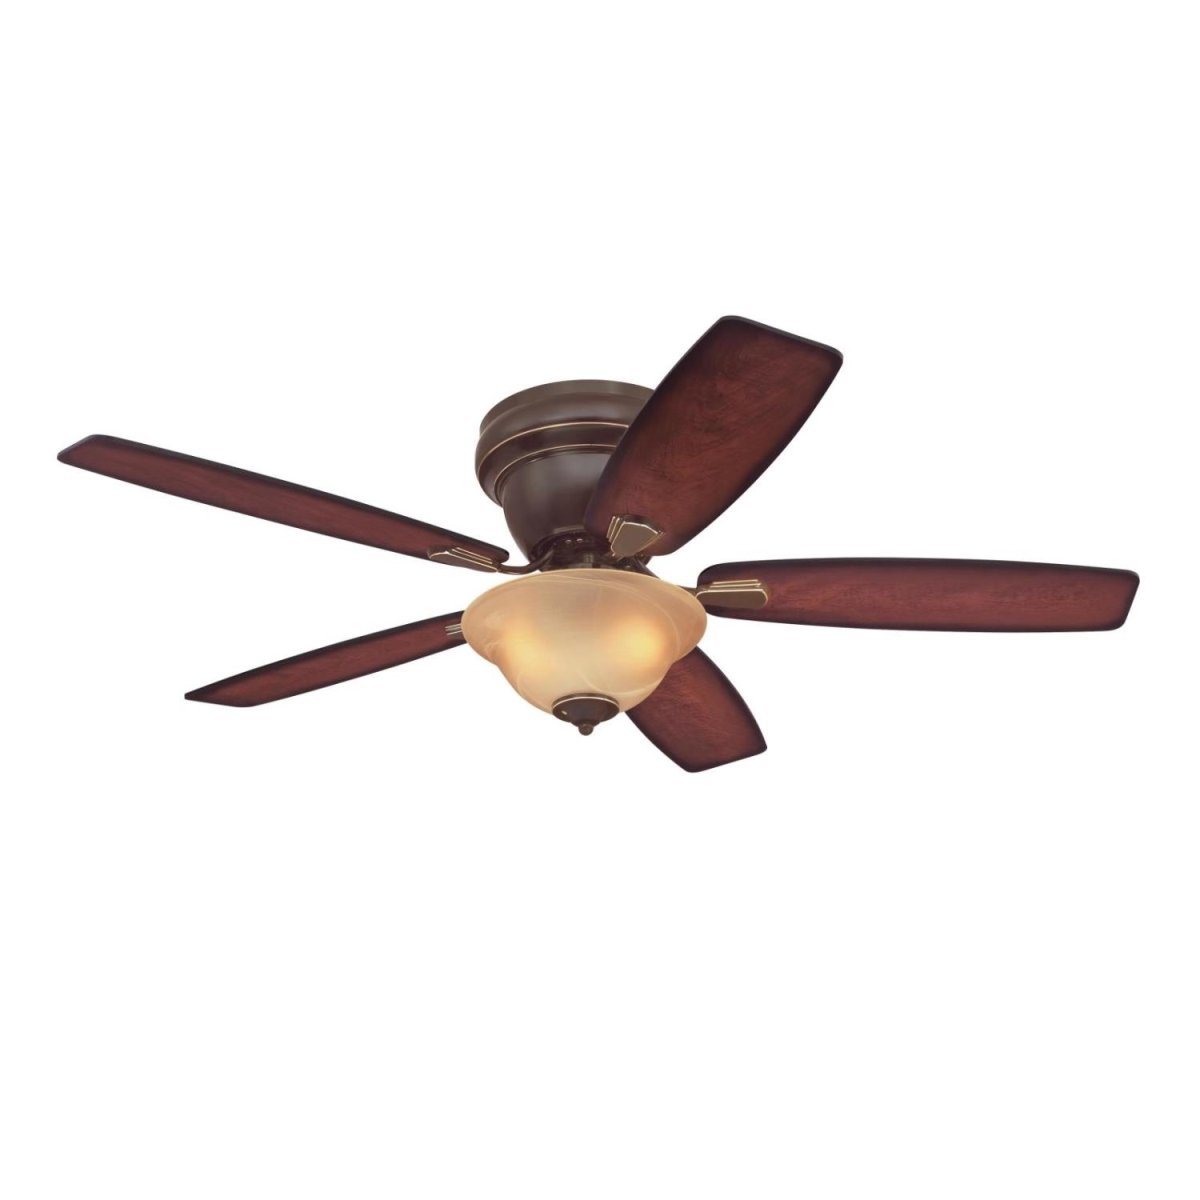 Picture of Westinghouse 7230600 52 in. Ceiling Fan with LED Light Fixture Classic Bronze Finish Reversible Blades Applewood with Shaded Edge & Dark Cherry Amber Alabaster Bowl